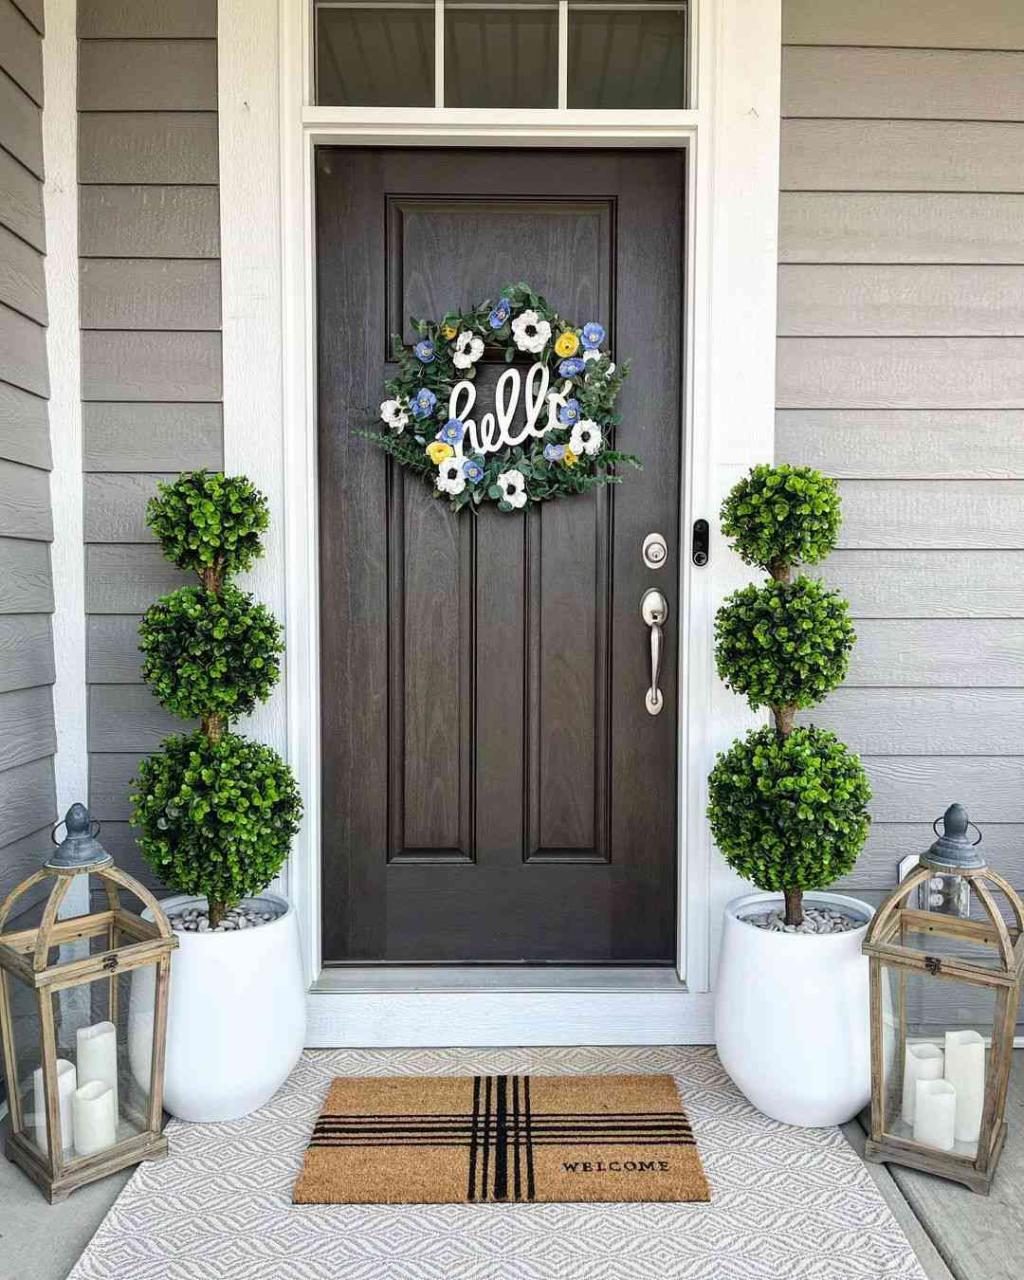 Decorating Outside Your Apartment Door: 5 Creative Ideas To Make Your  Neighbors Envious!